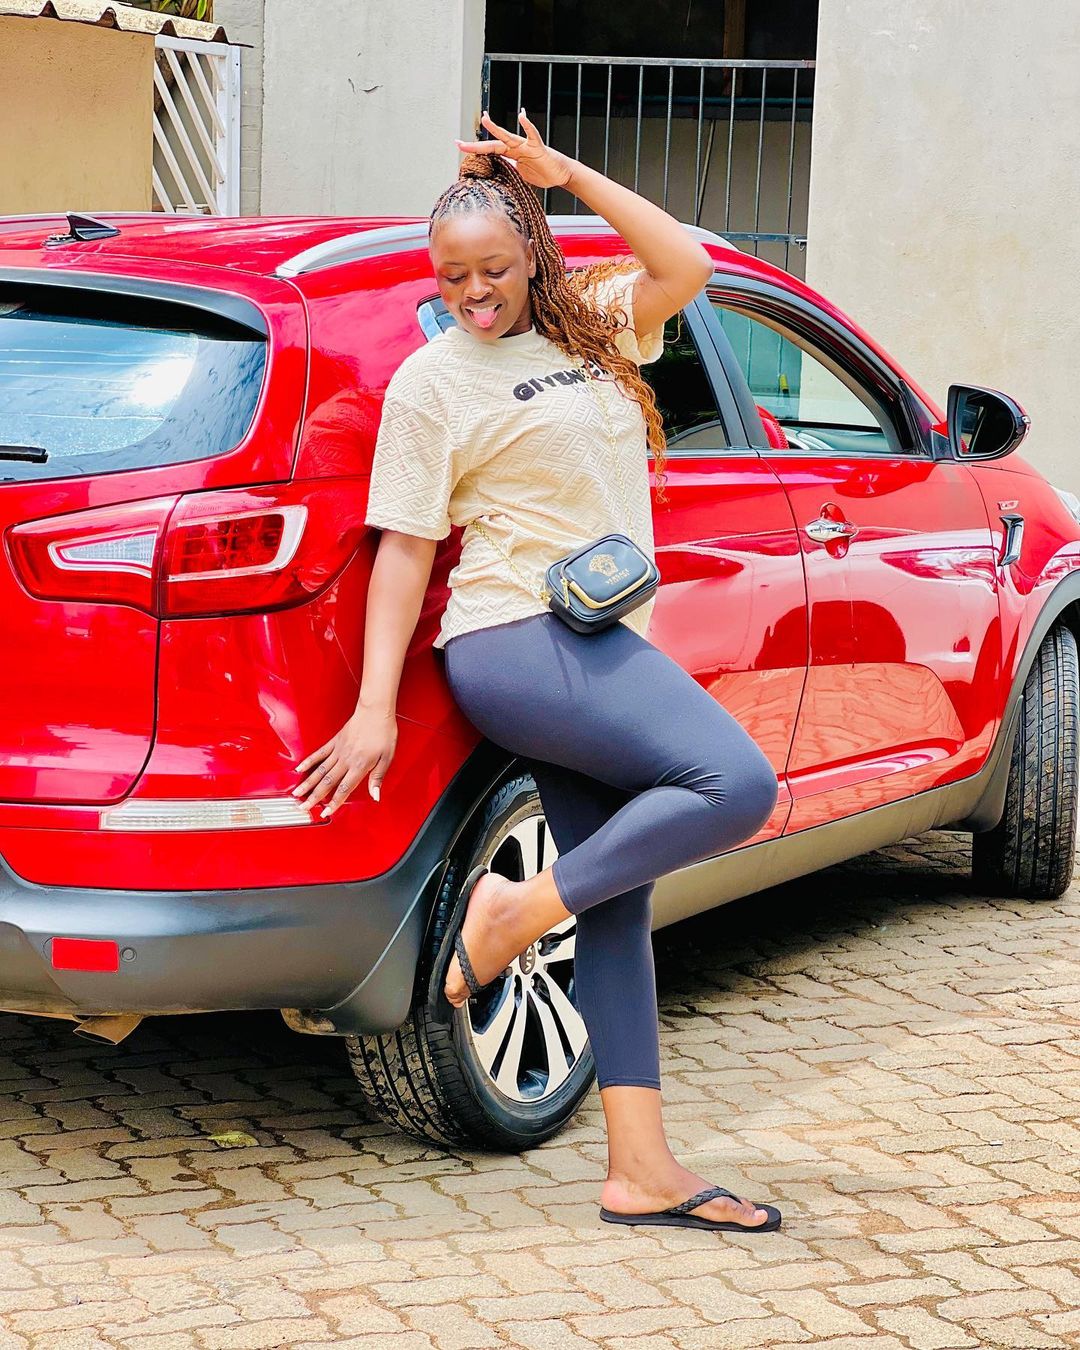 Lorraine Guyo Valentine's Gift: Another Woman Says it’s her vehicle, taken away by her husband!